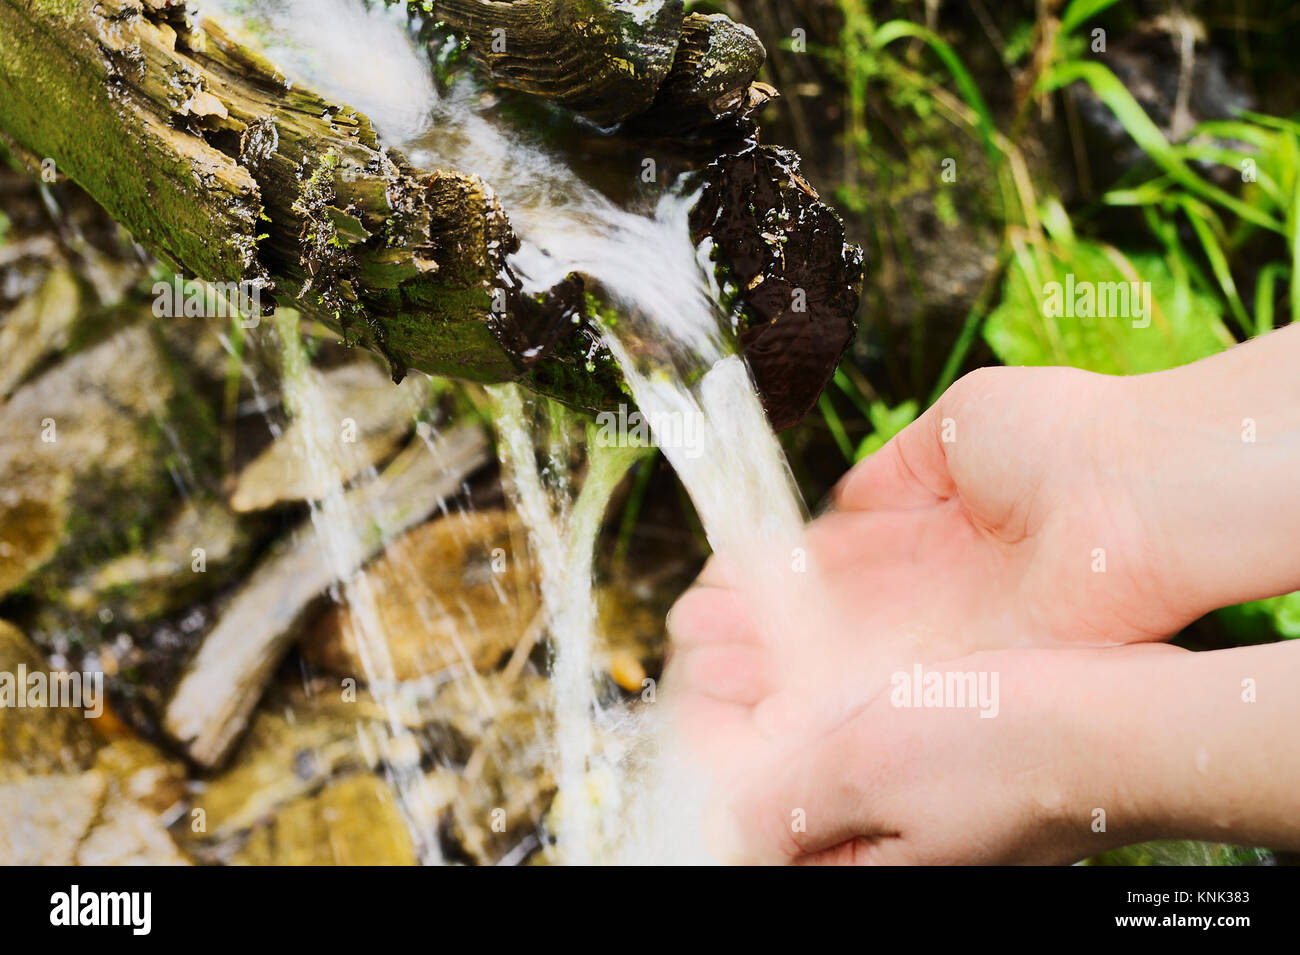 Wellspring flowing from wooden gutter in forest. Human hands taking pure, fresh, drinking water from natural source. Stock Photo